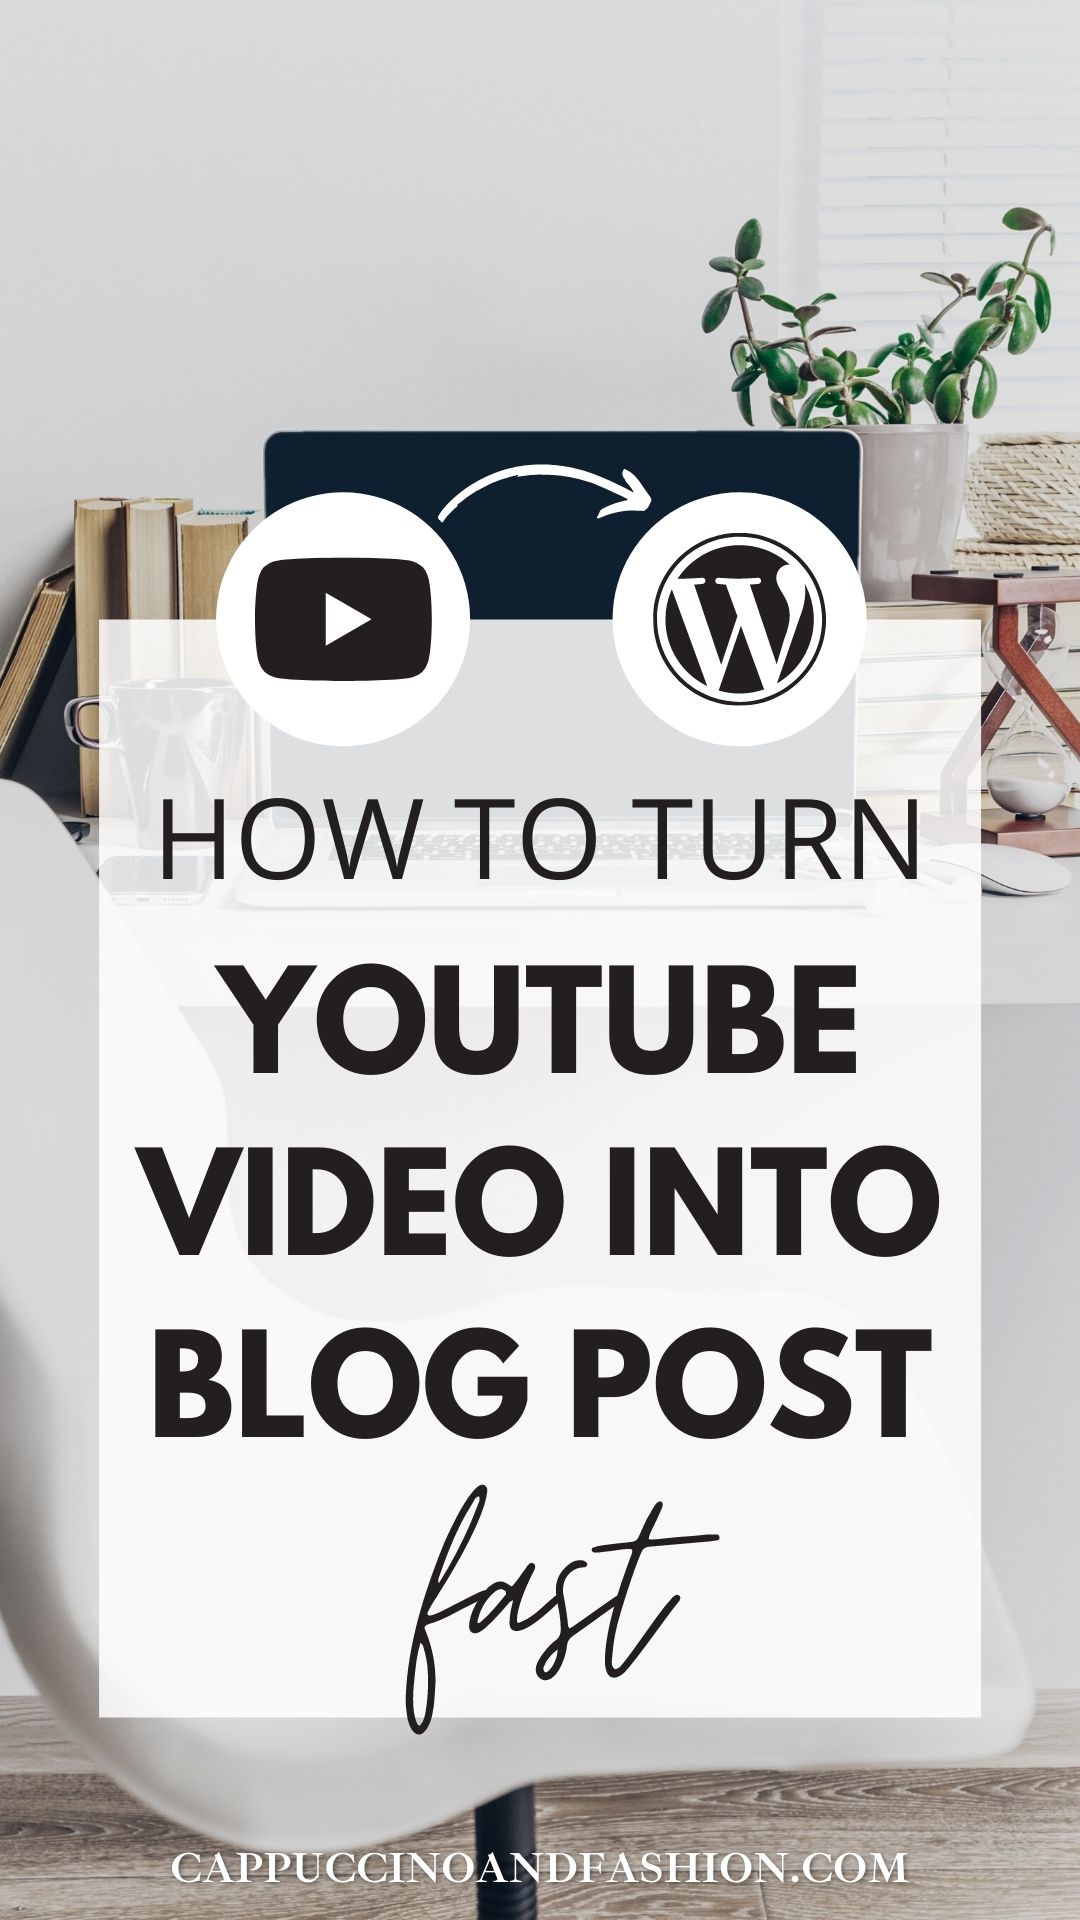 How to turn YouTube videos into Blog Posts easily, fast and free